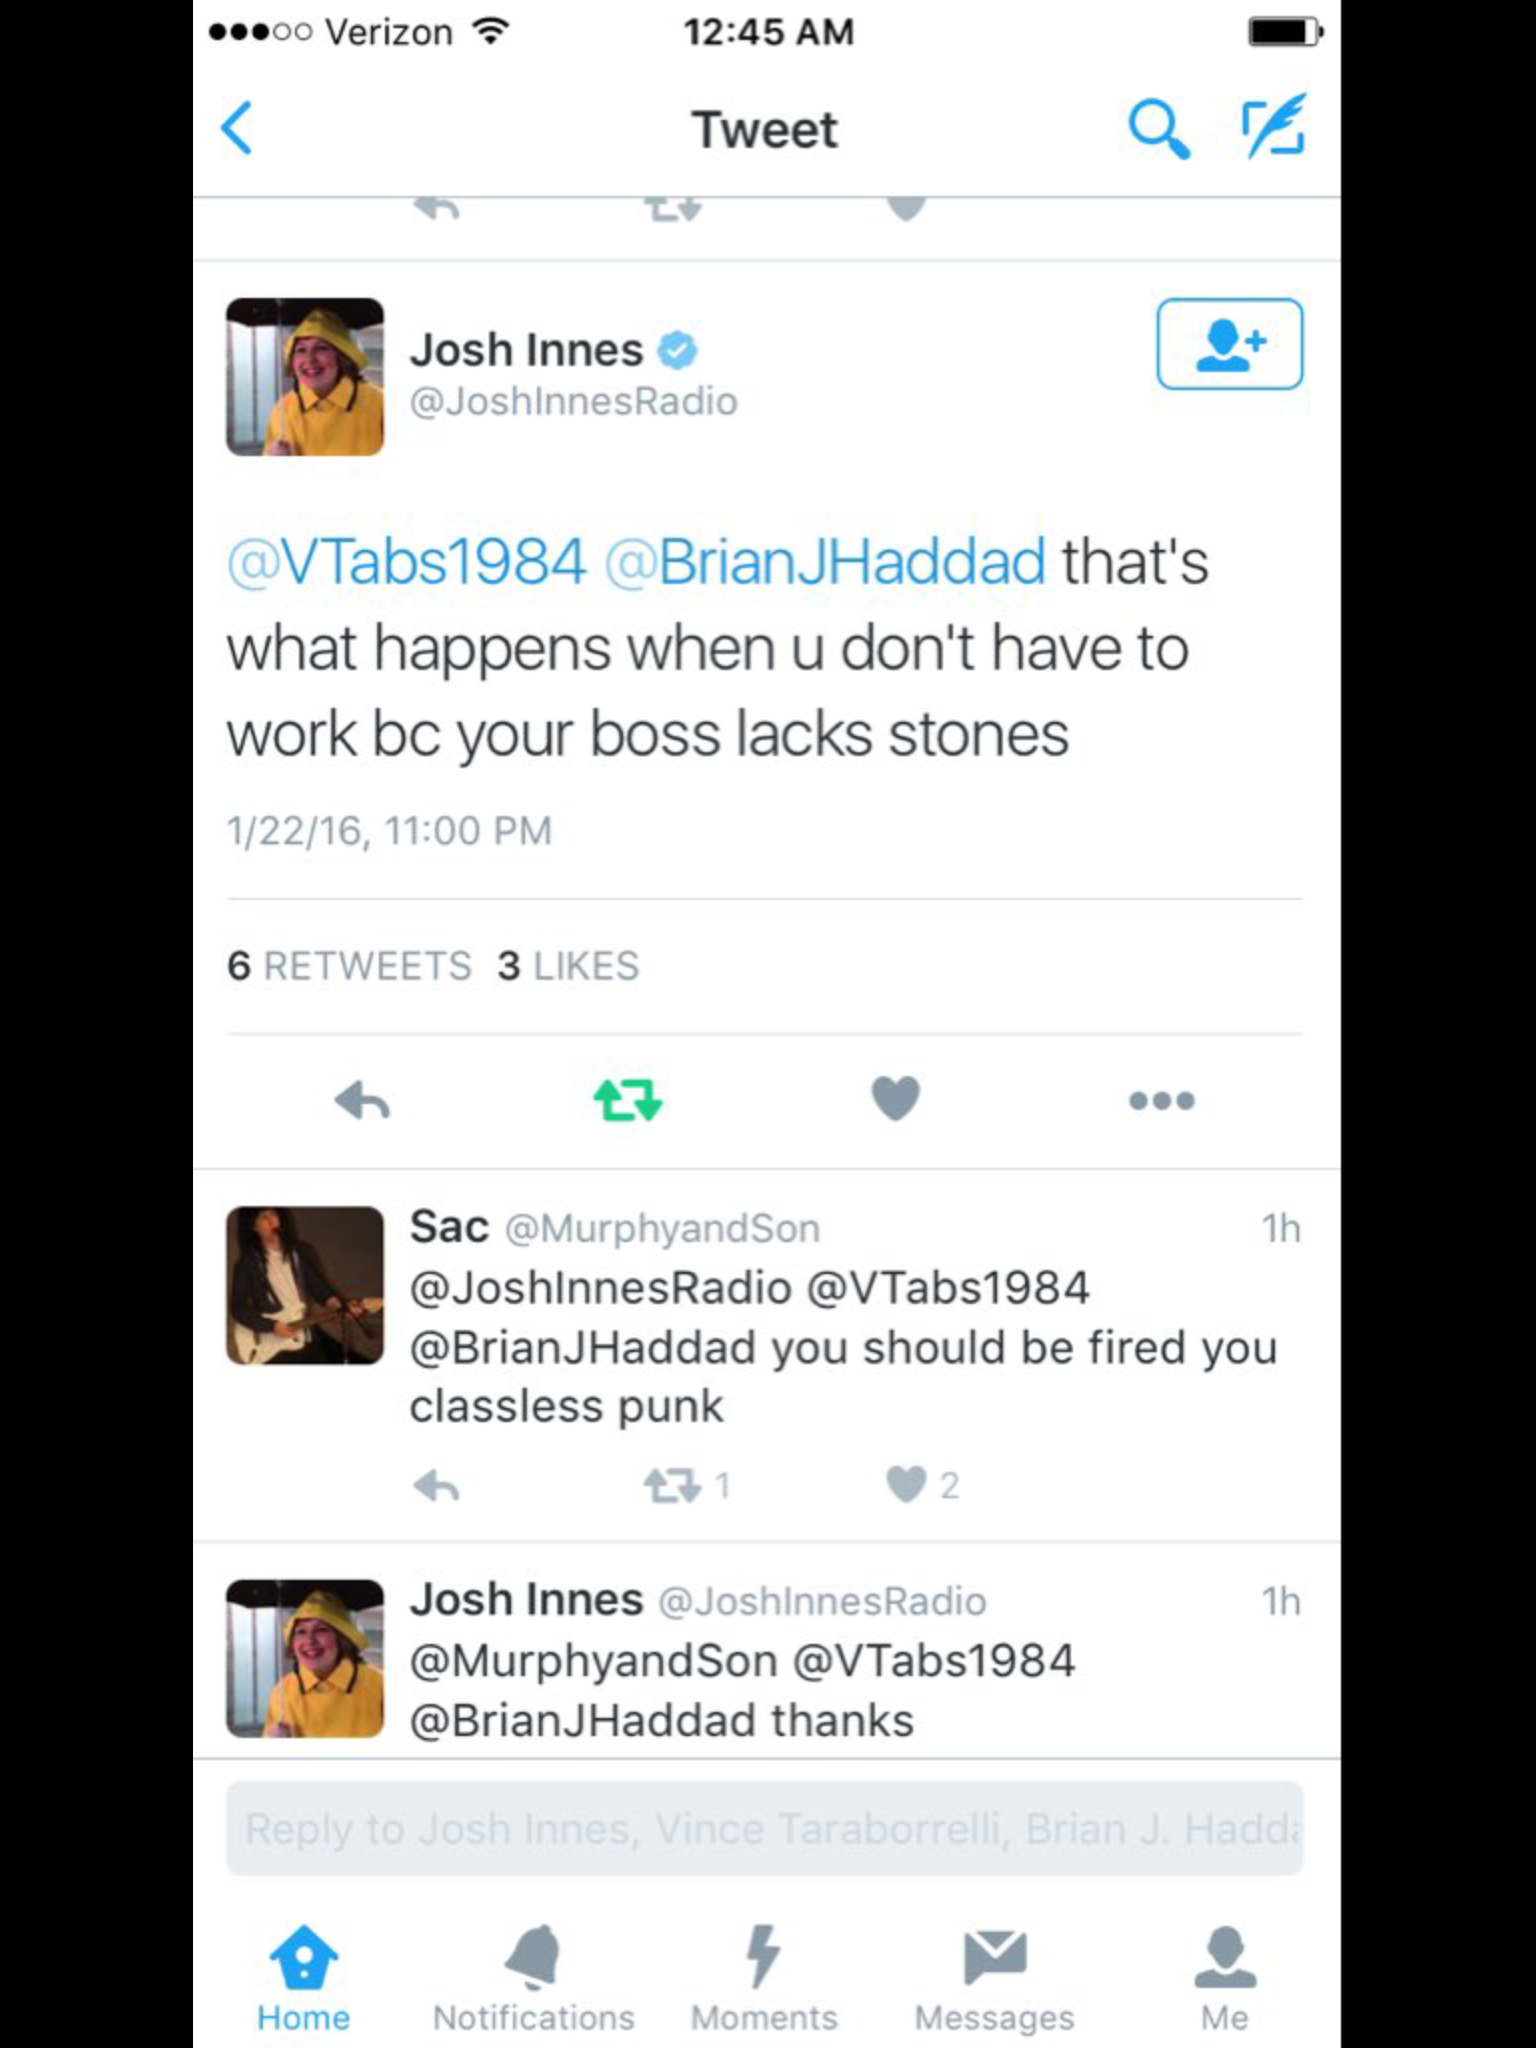 Josh Innes, Suspended for Calling Jason Kelce a House Negro, Says His Boss Lacks Stones